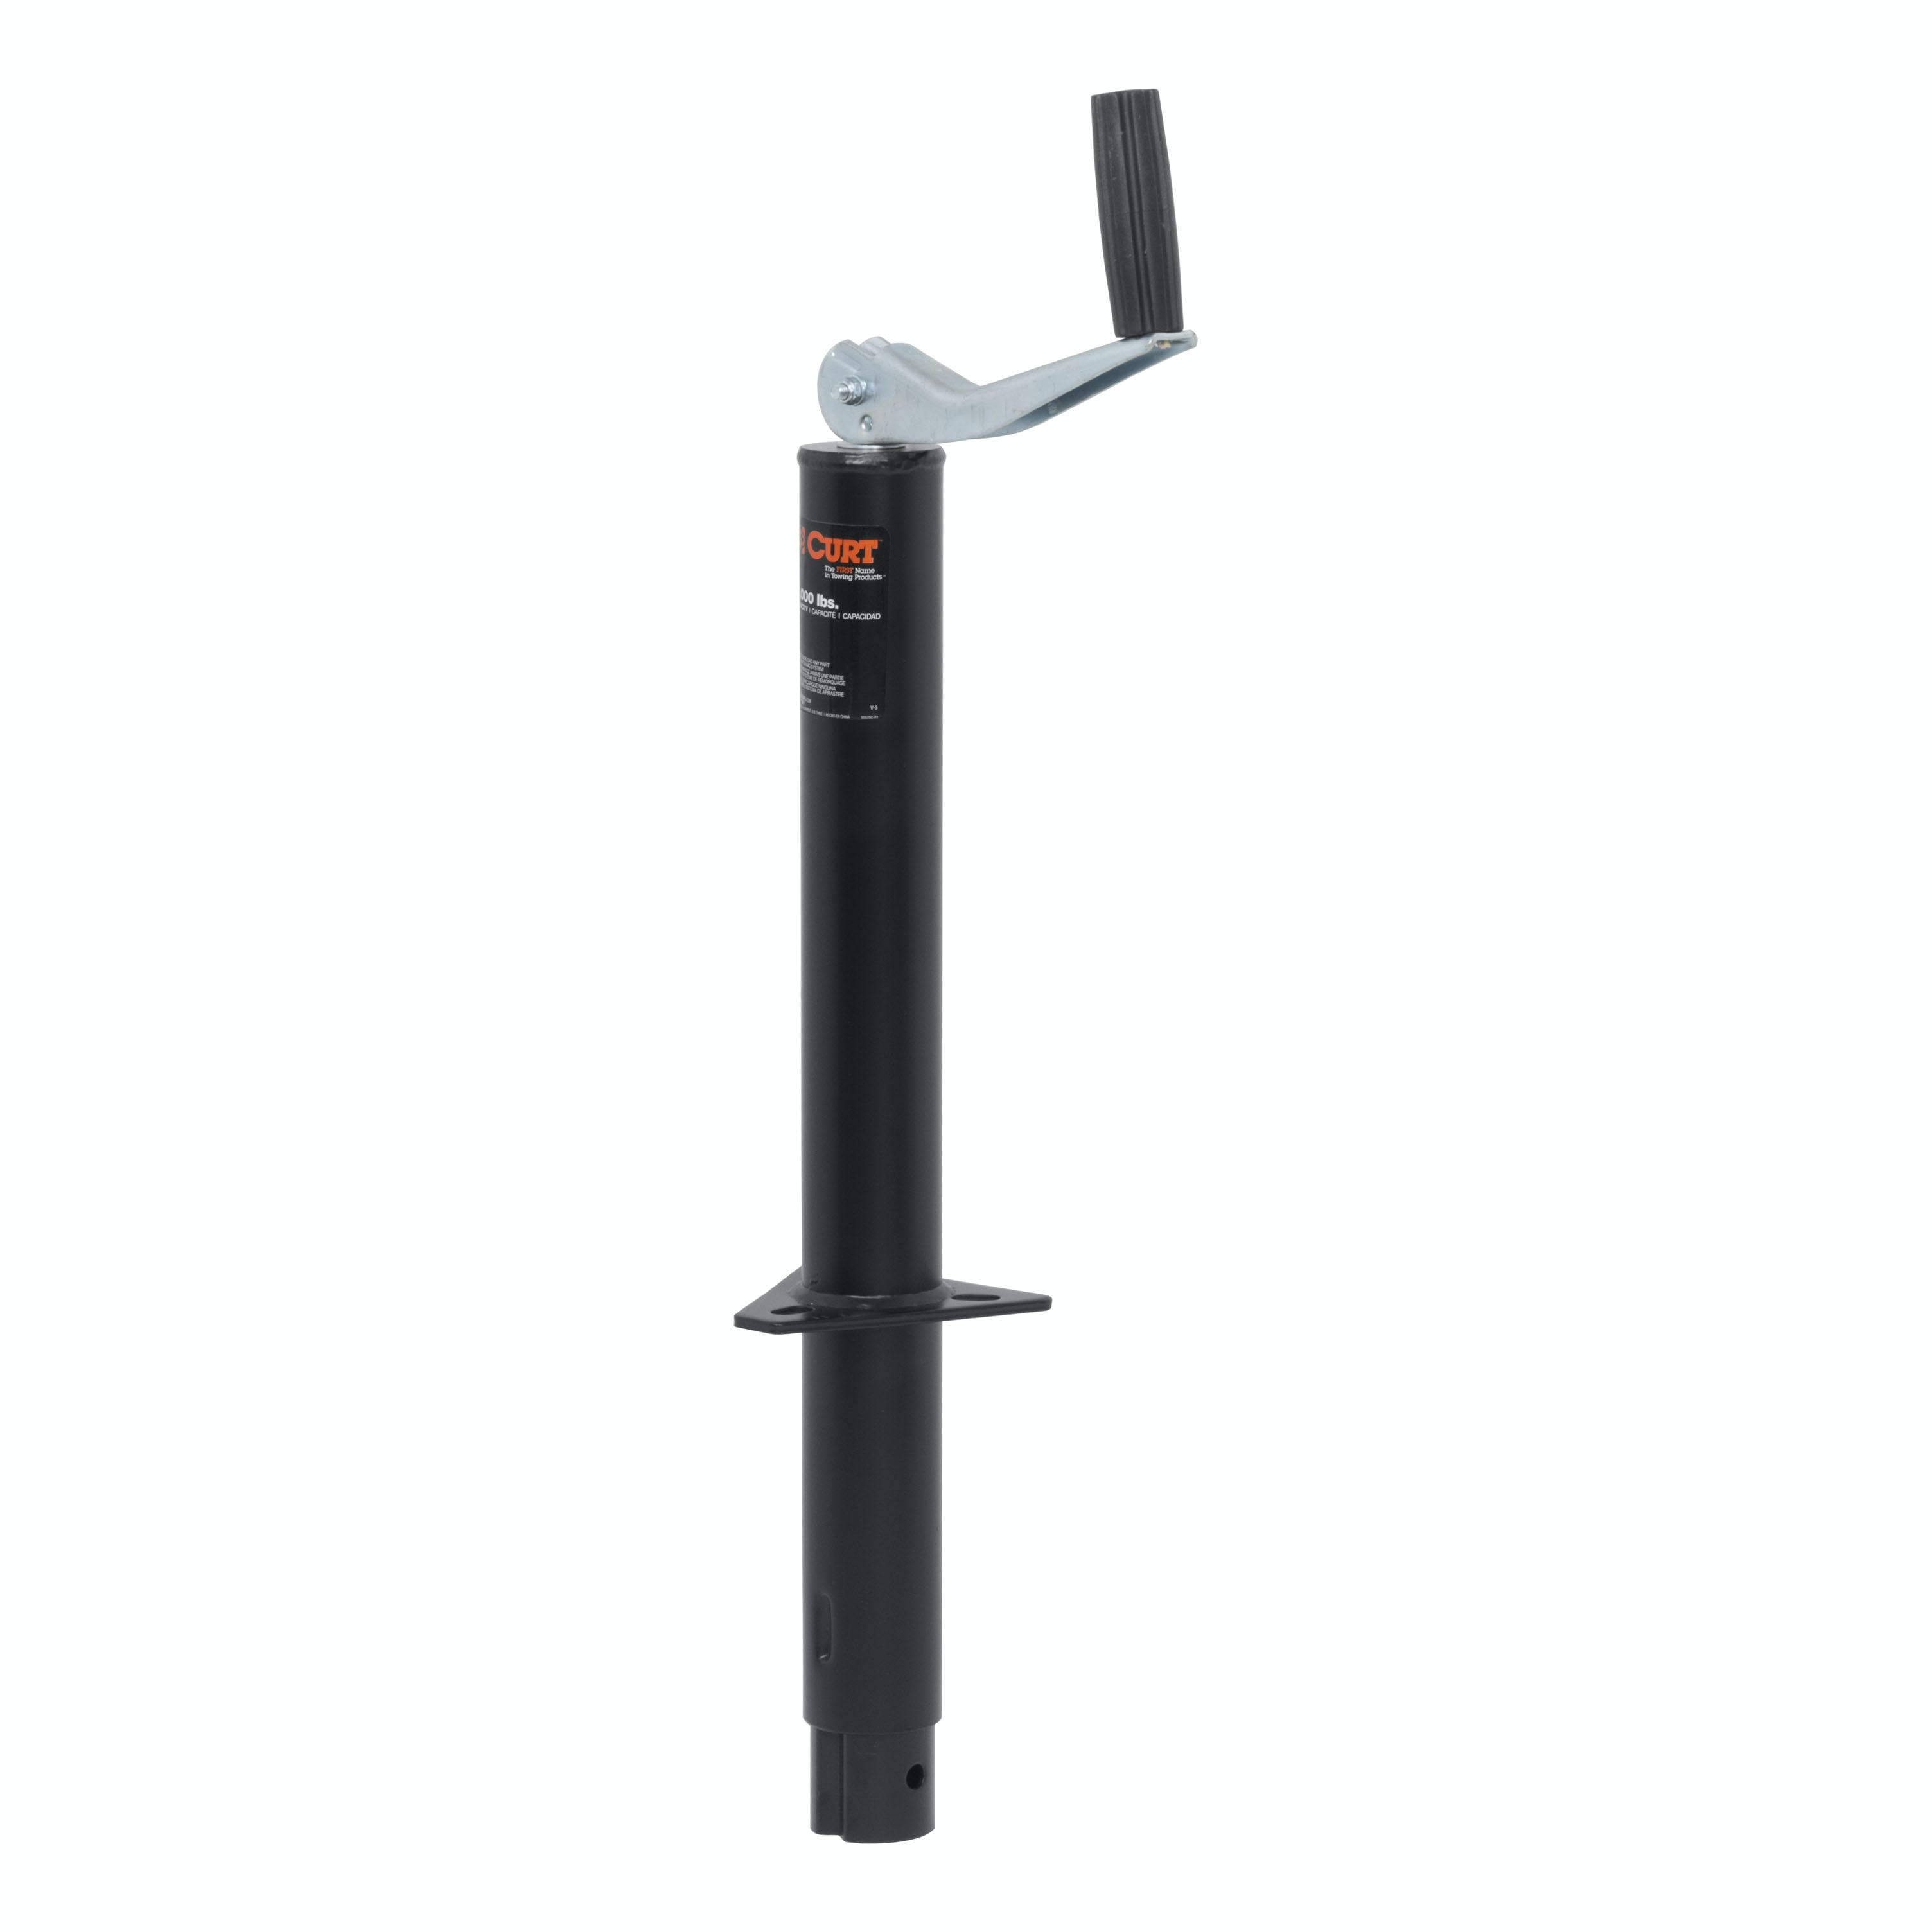 CURT 28202 A-Frame Jack with Top Handle (2,000 lbs, 15 Travel)